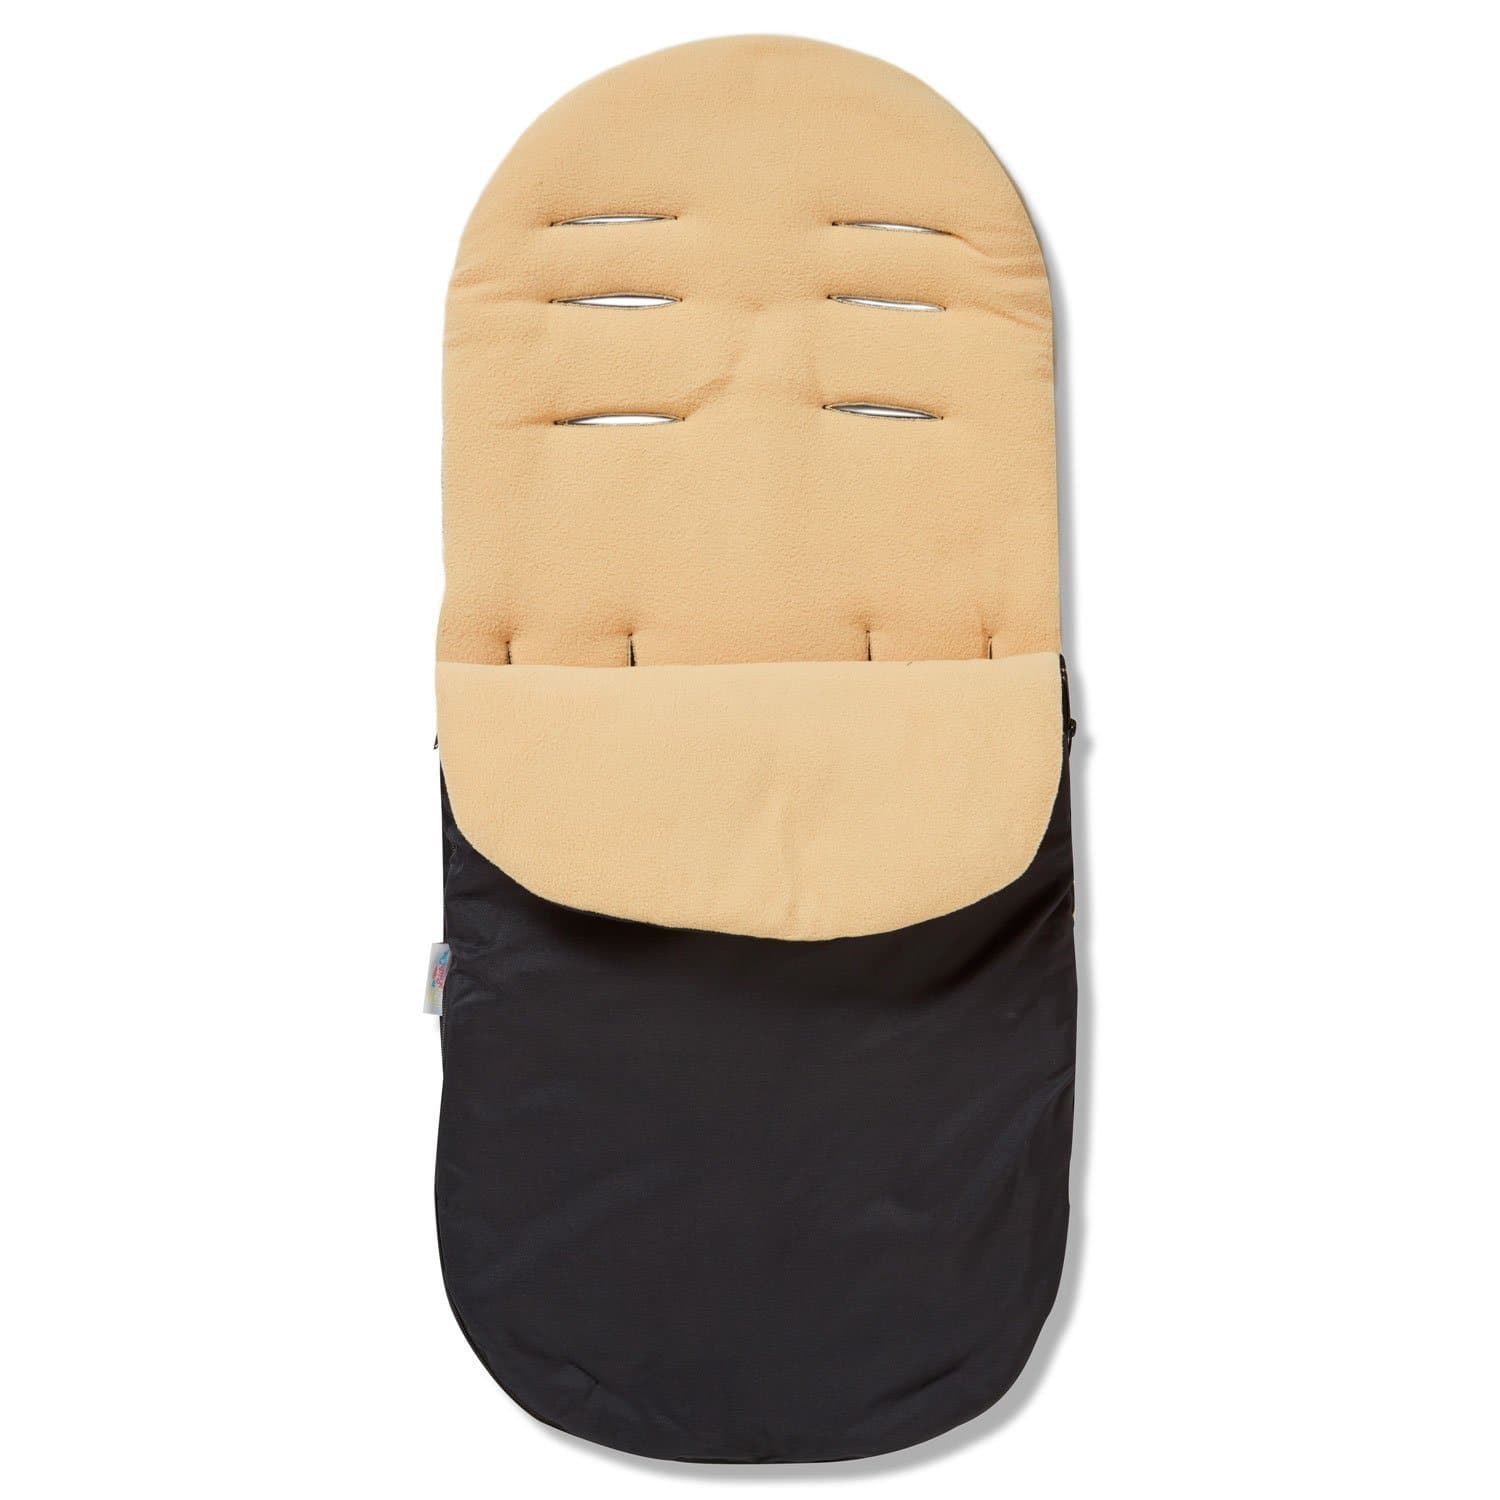 Footmuff / Cosy Toes Compatible with BabyCare - Sand / Fits All Models | For Your Little One